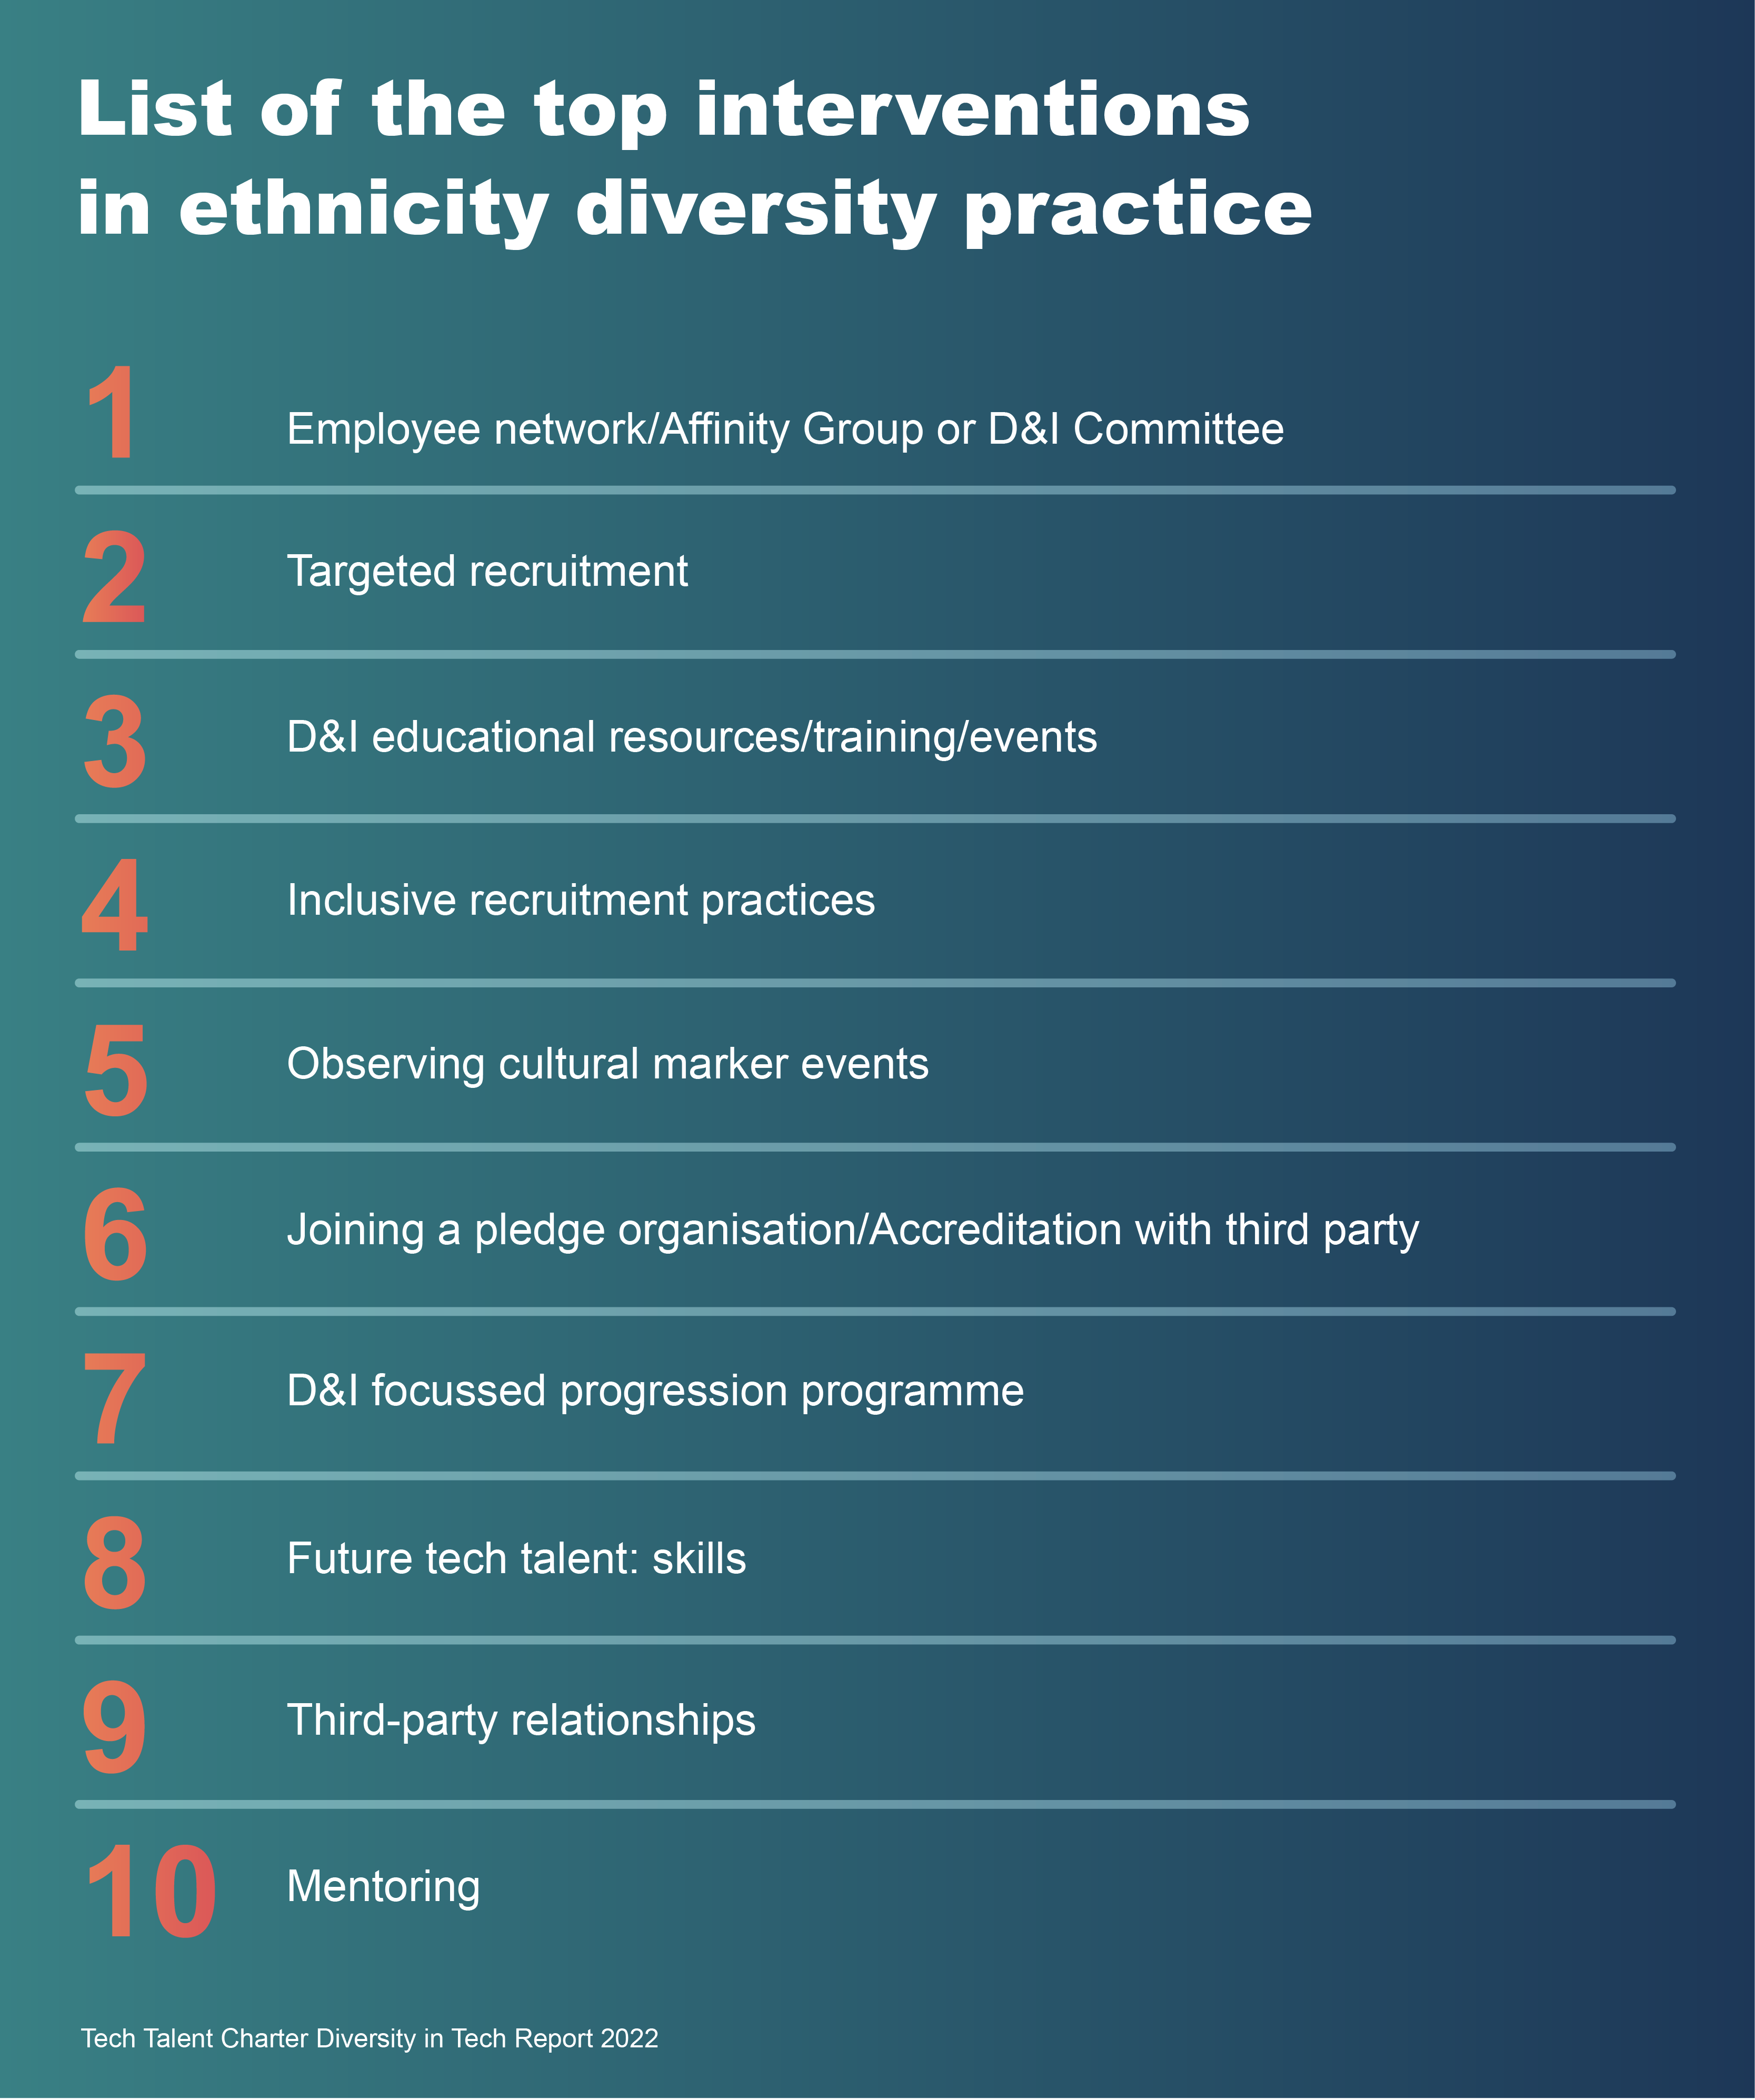 A list of the top interventions in ethnicity diversity practice